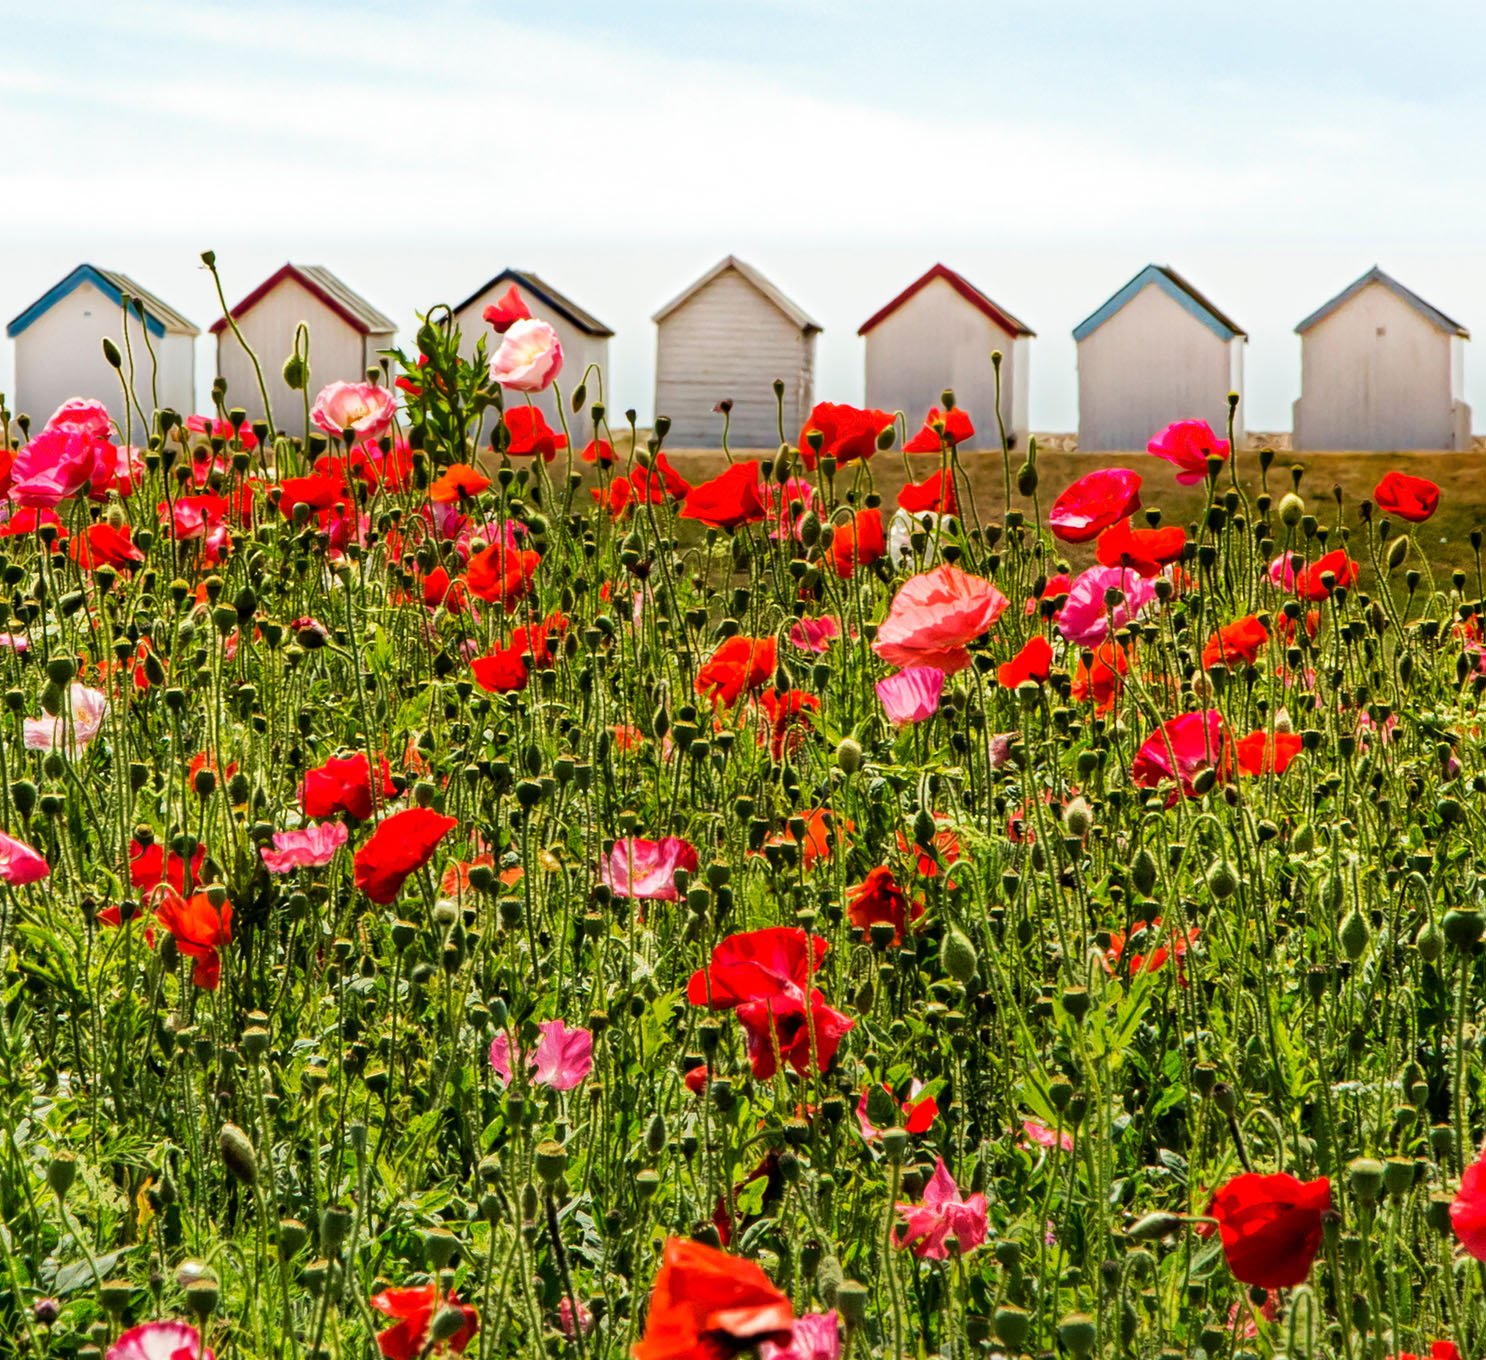 Red and pink poppies with beach huts in the background at Goring, West Sussex